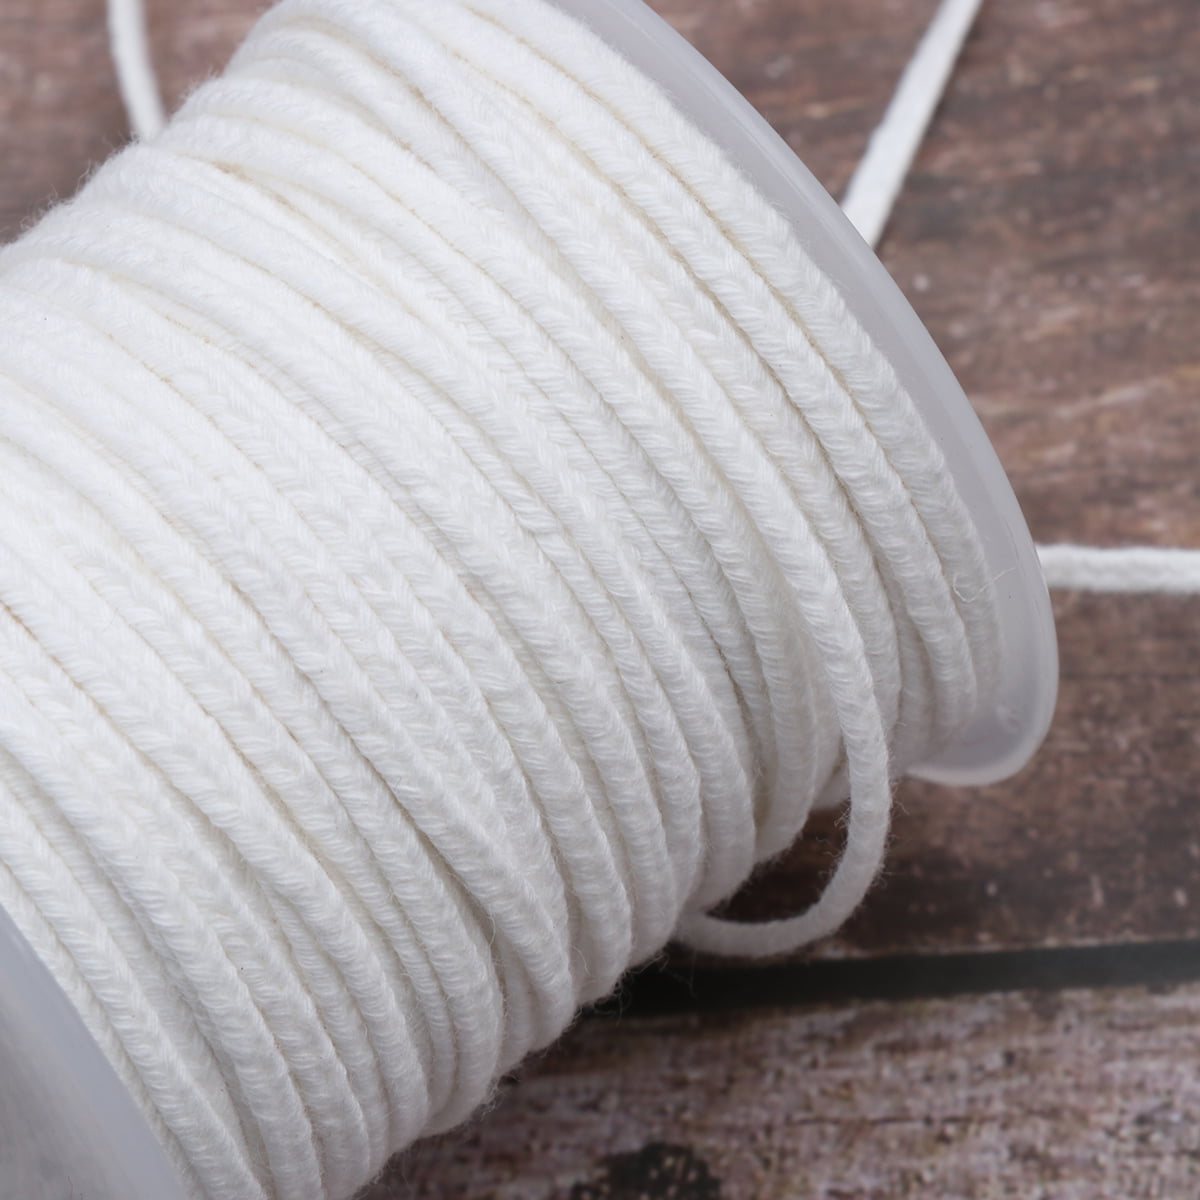 1 Roll 61 Meter Pre Waxed Wicks Candle Making Material DIY Cotton 18 Strands Braided Candle Wick Spool for DIY Candle (White), Size: 45g